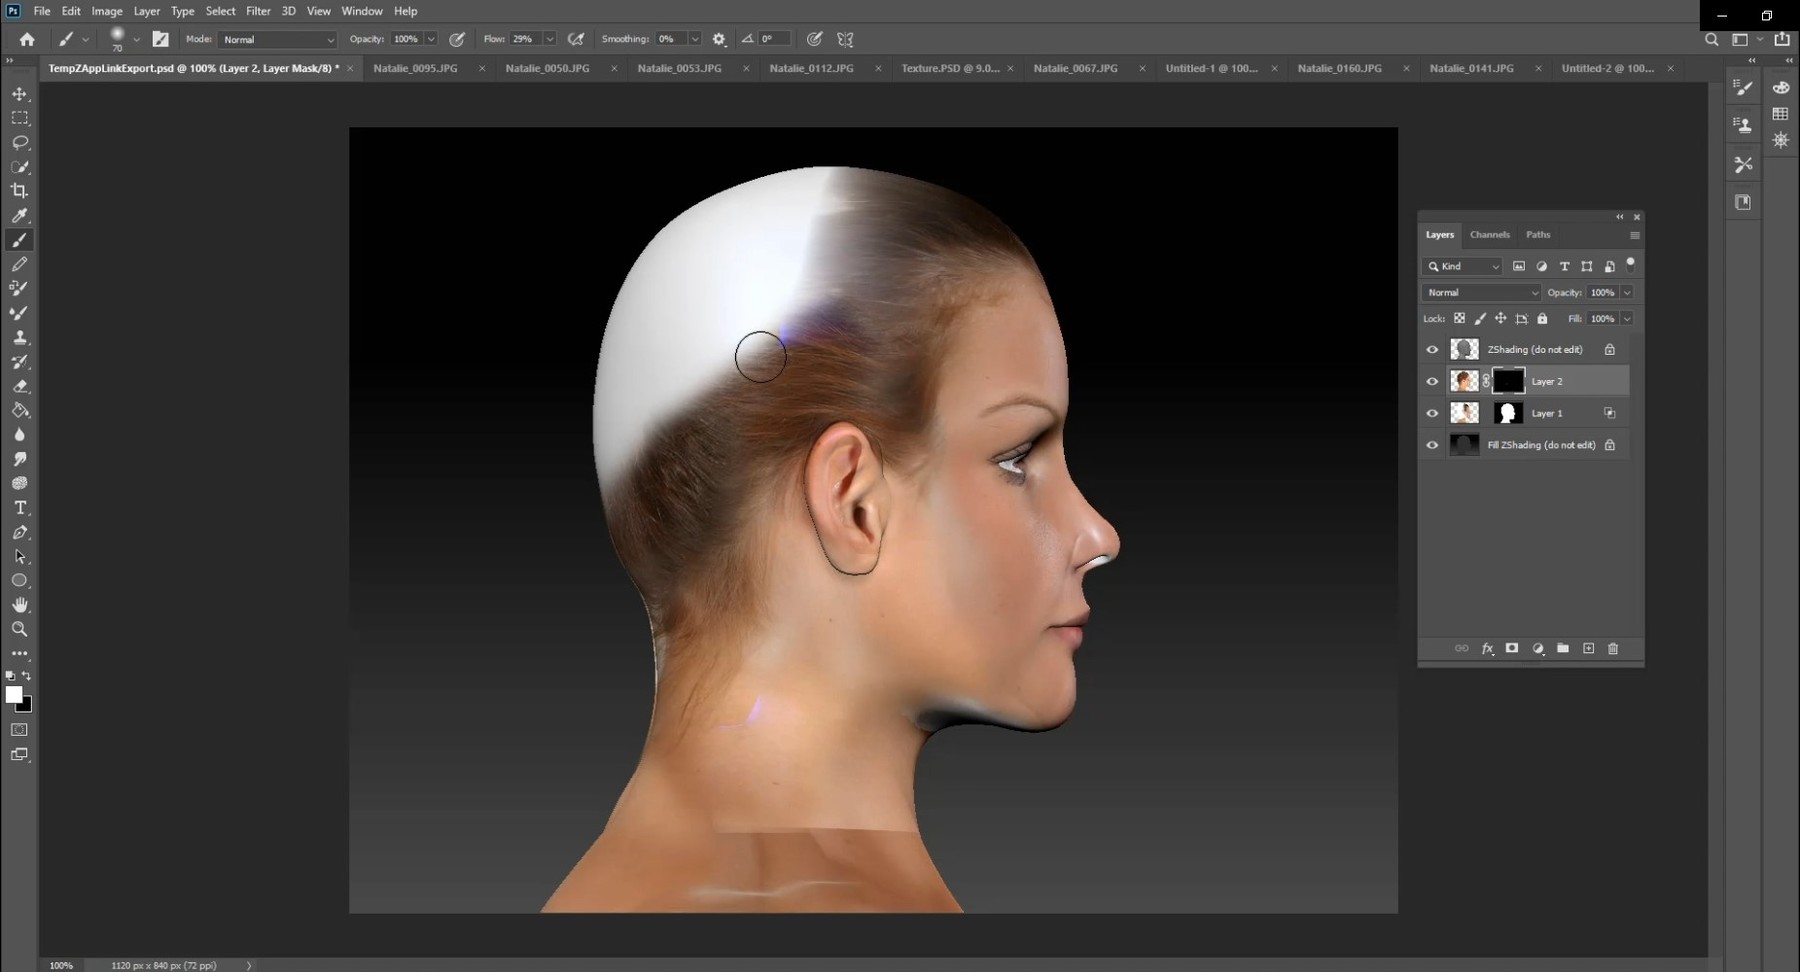 zbrush best angle of view